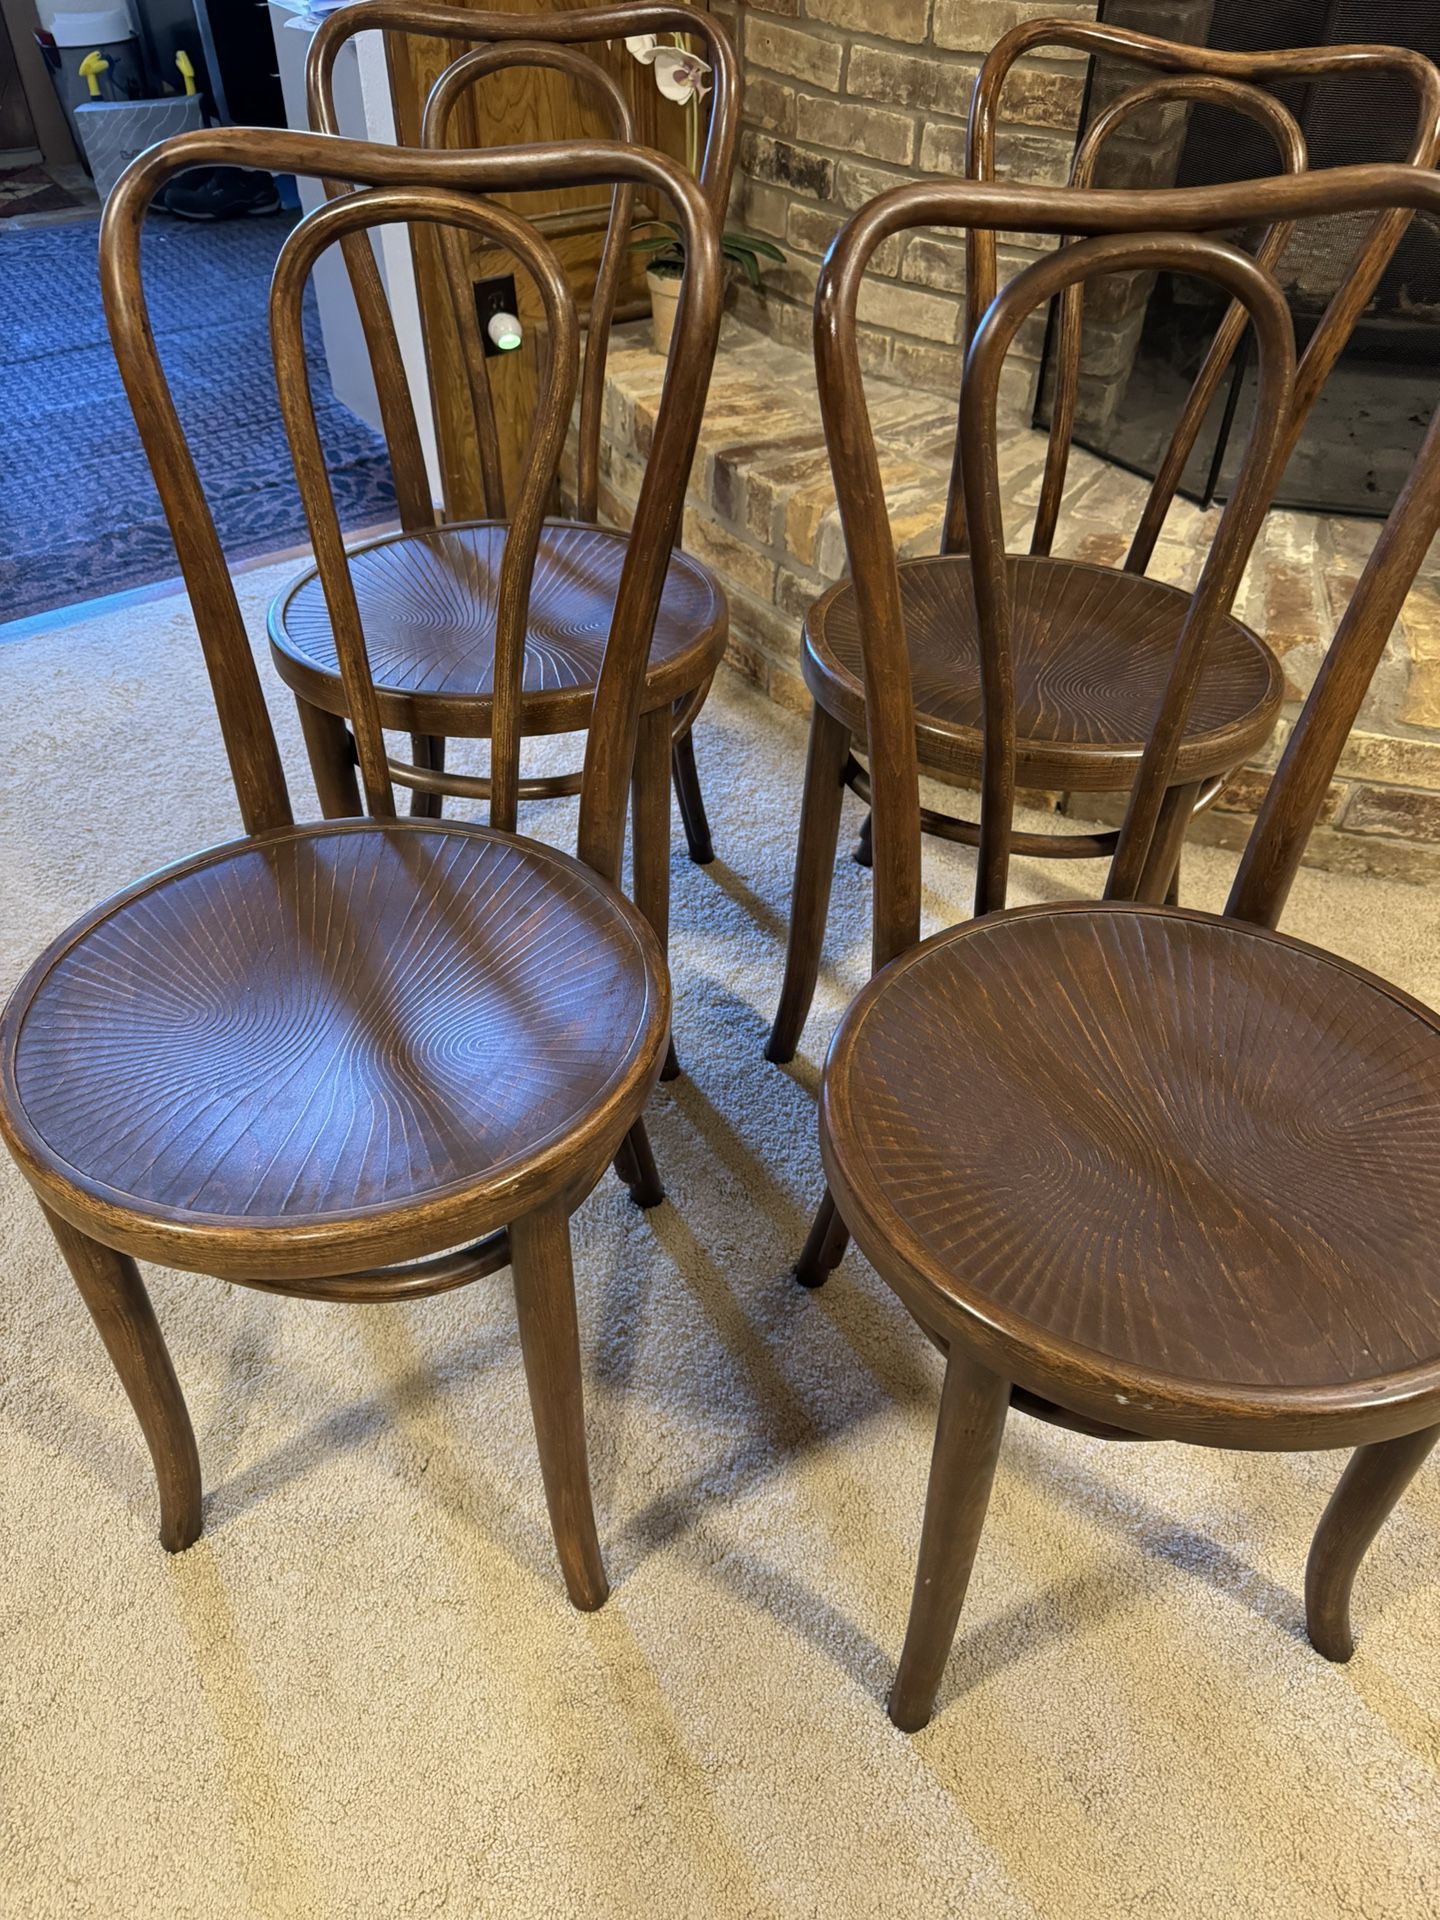 4 Vintage Solid Wood Dining Chairs